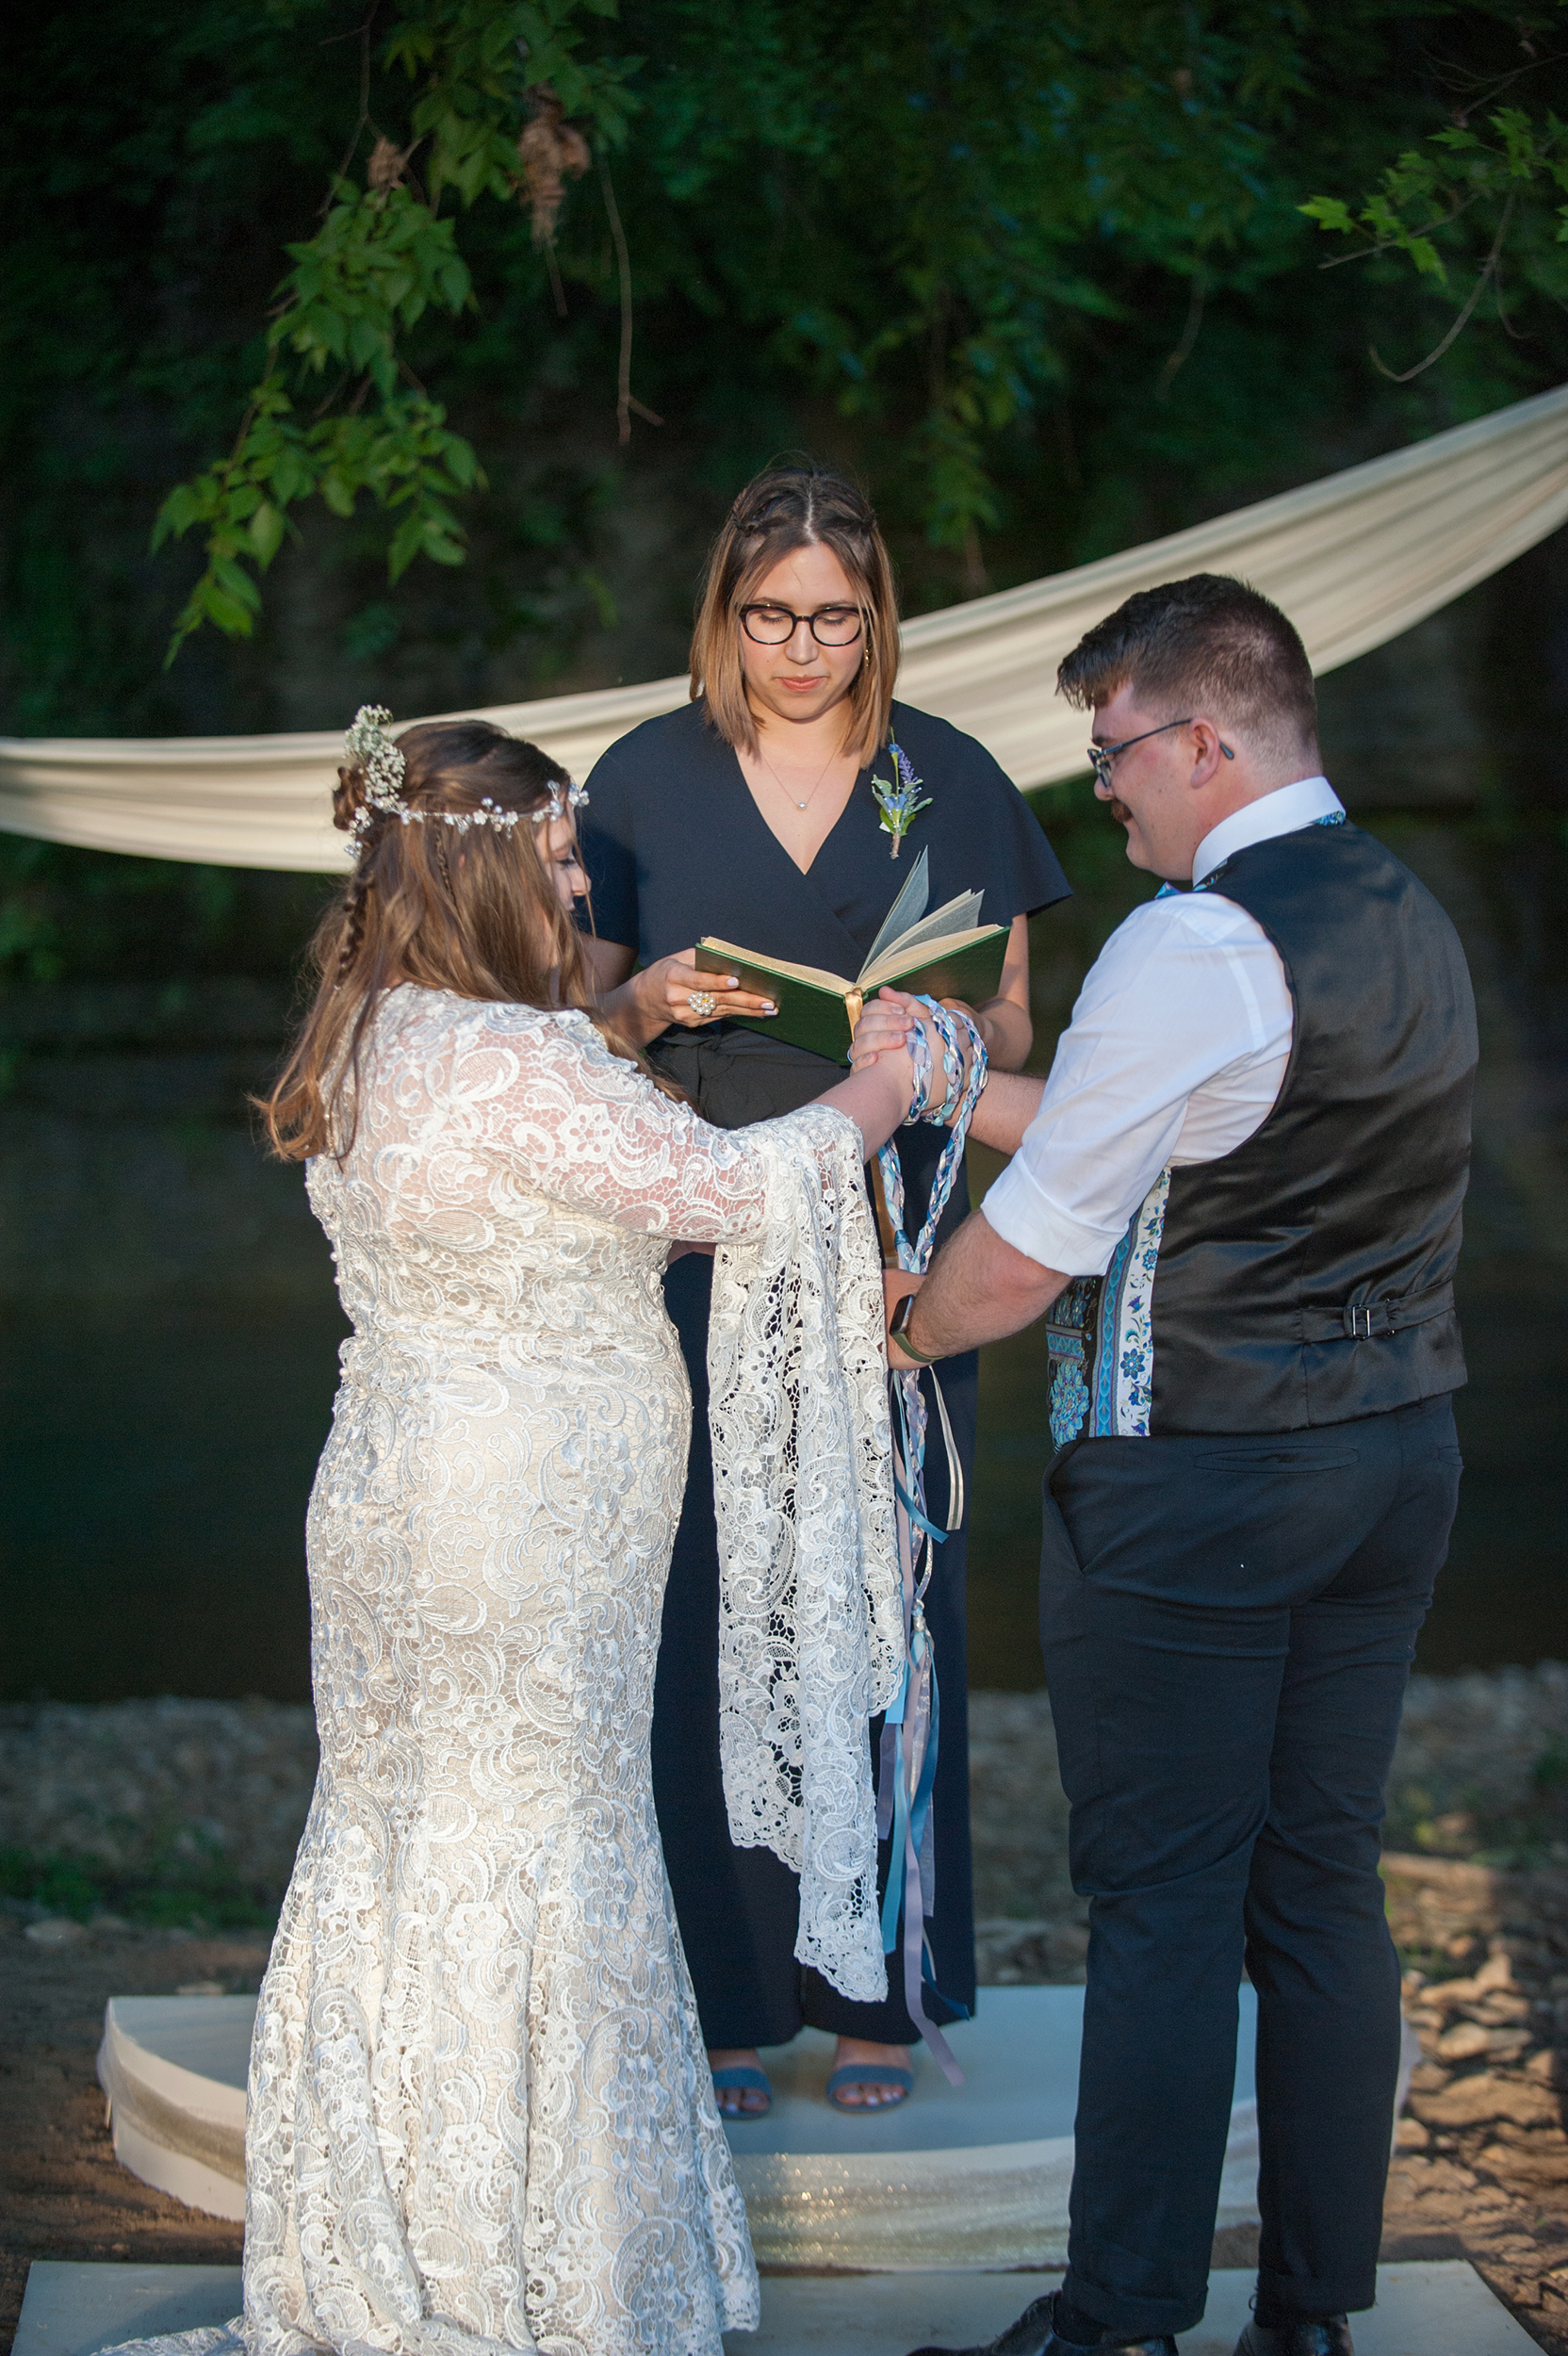 Handfasting portion of the wedding ceremony